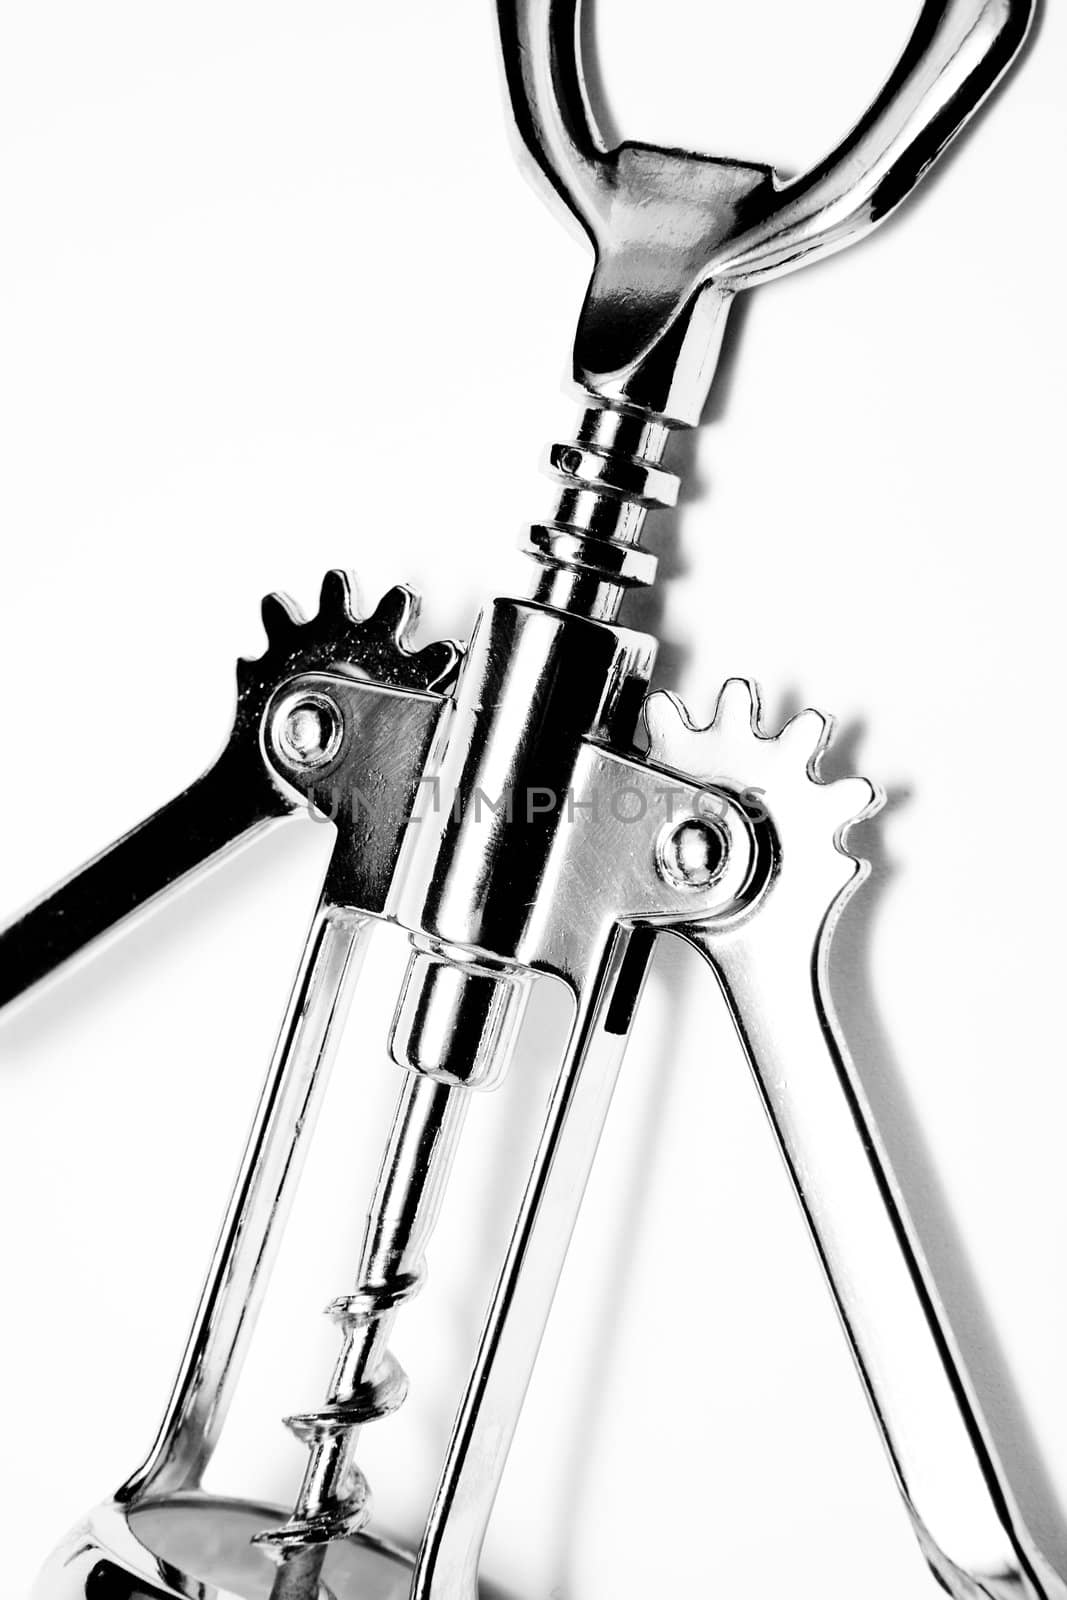 Classic corkscrew with integrated bottle opener